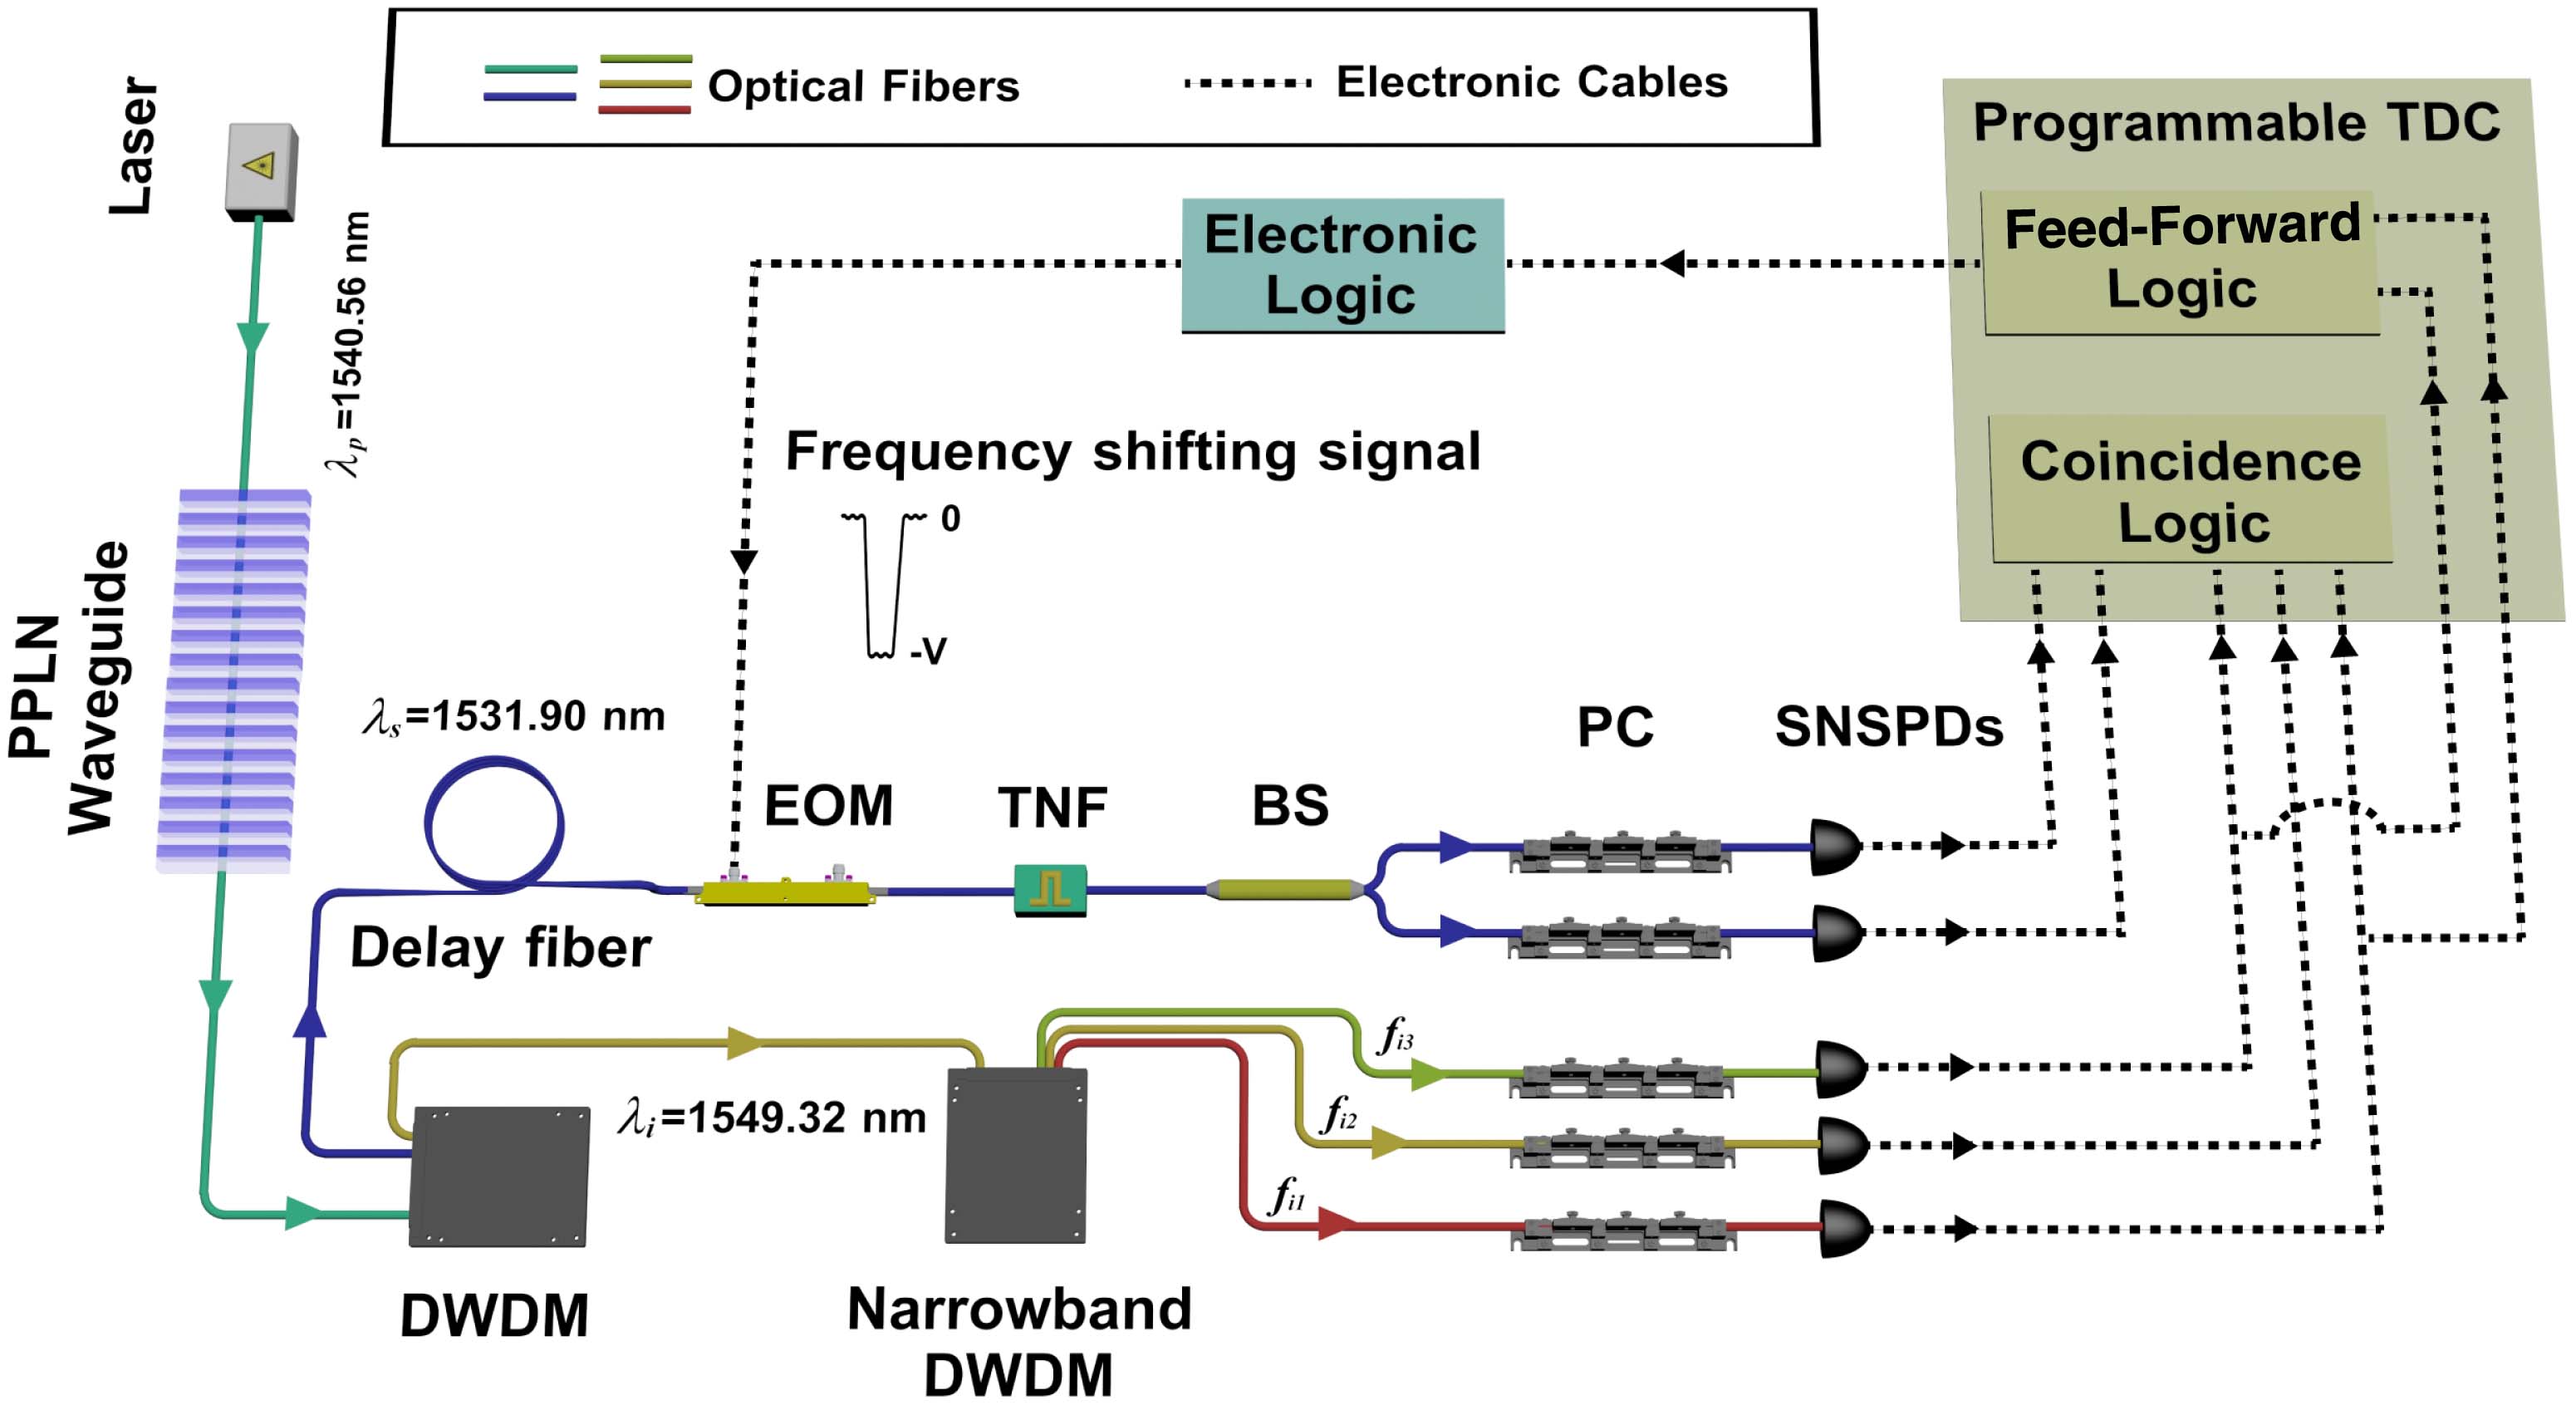 Experimental setup for spectrally multiplexed HSPS. PPLN, periodically poled lithium niobate; DWDM, dense wavelength-divided multiplexer; EOM, electro-optic phase modulator; TNF, tunable narrowband filter; BS, beam splitter; PC, polarization controller; TDC, time-to-digit convertor; SNSPD, superconducting nanowire single-photon detector.